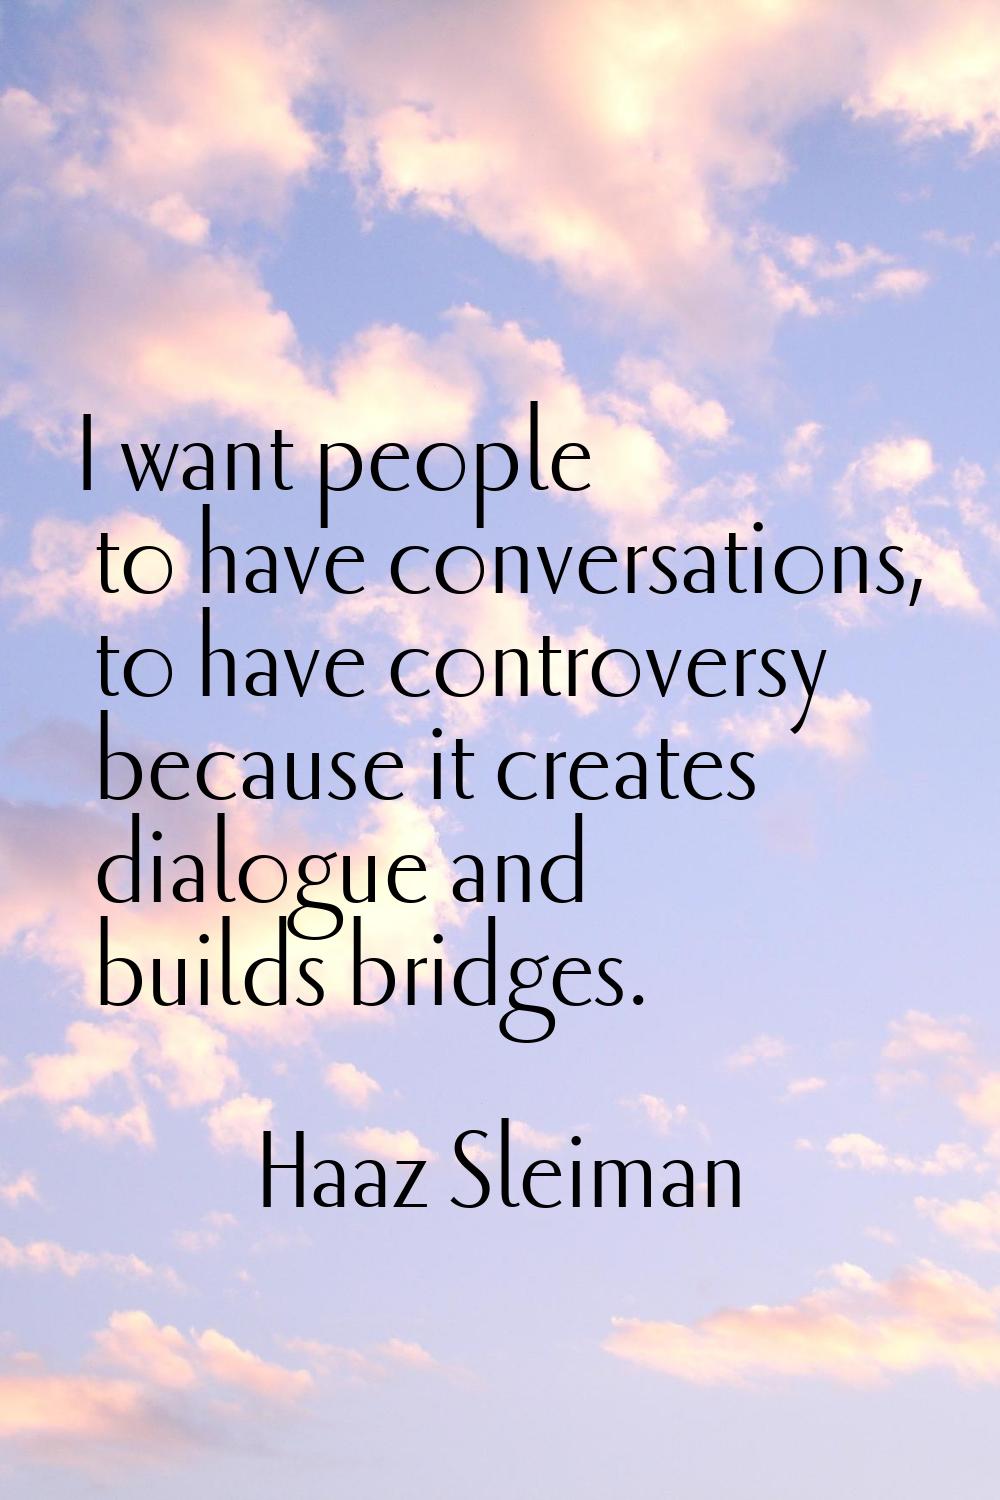 I want people to have conversations, to have controversy because it creates dialogue and builds bri